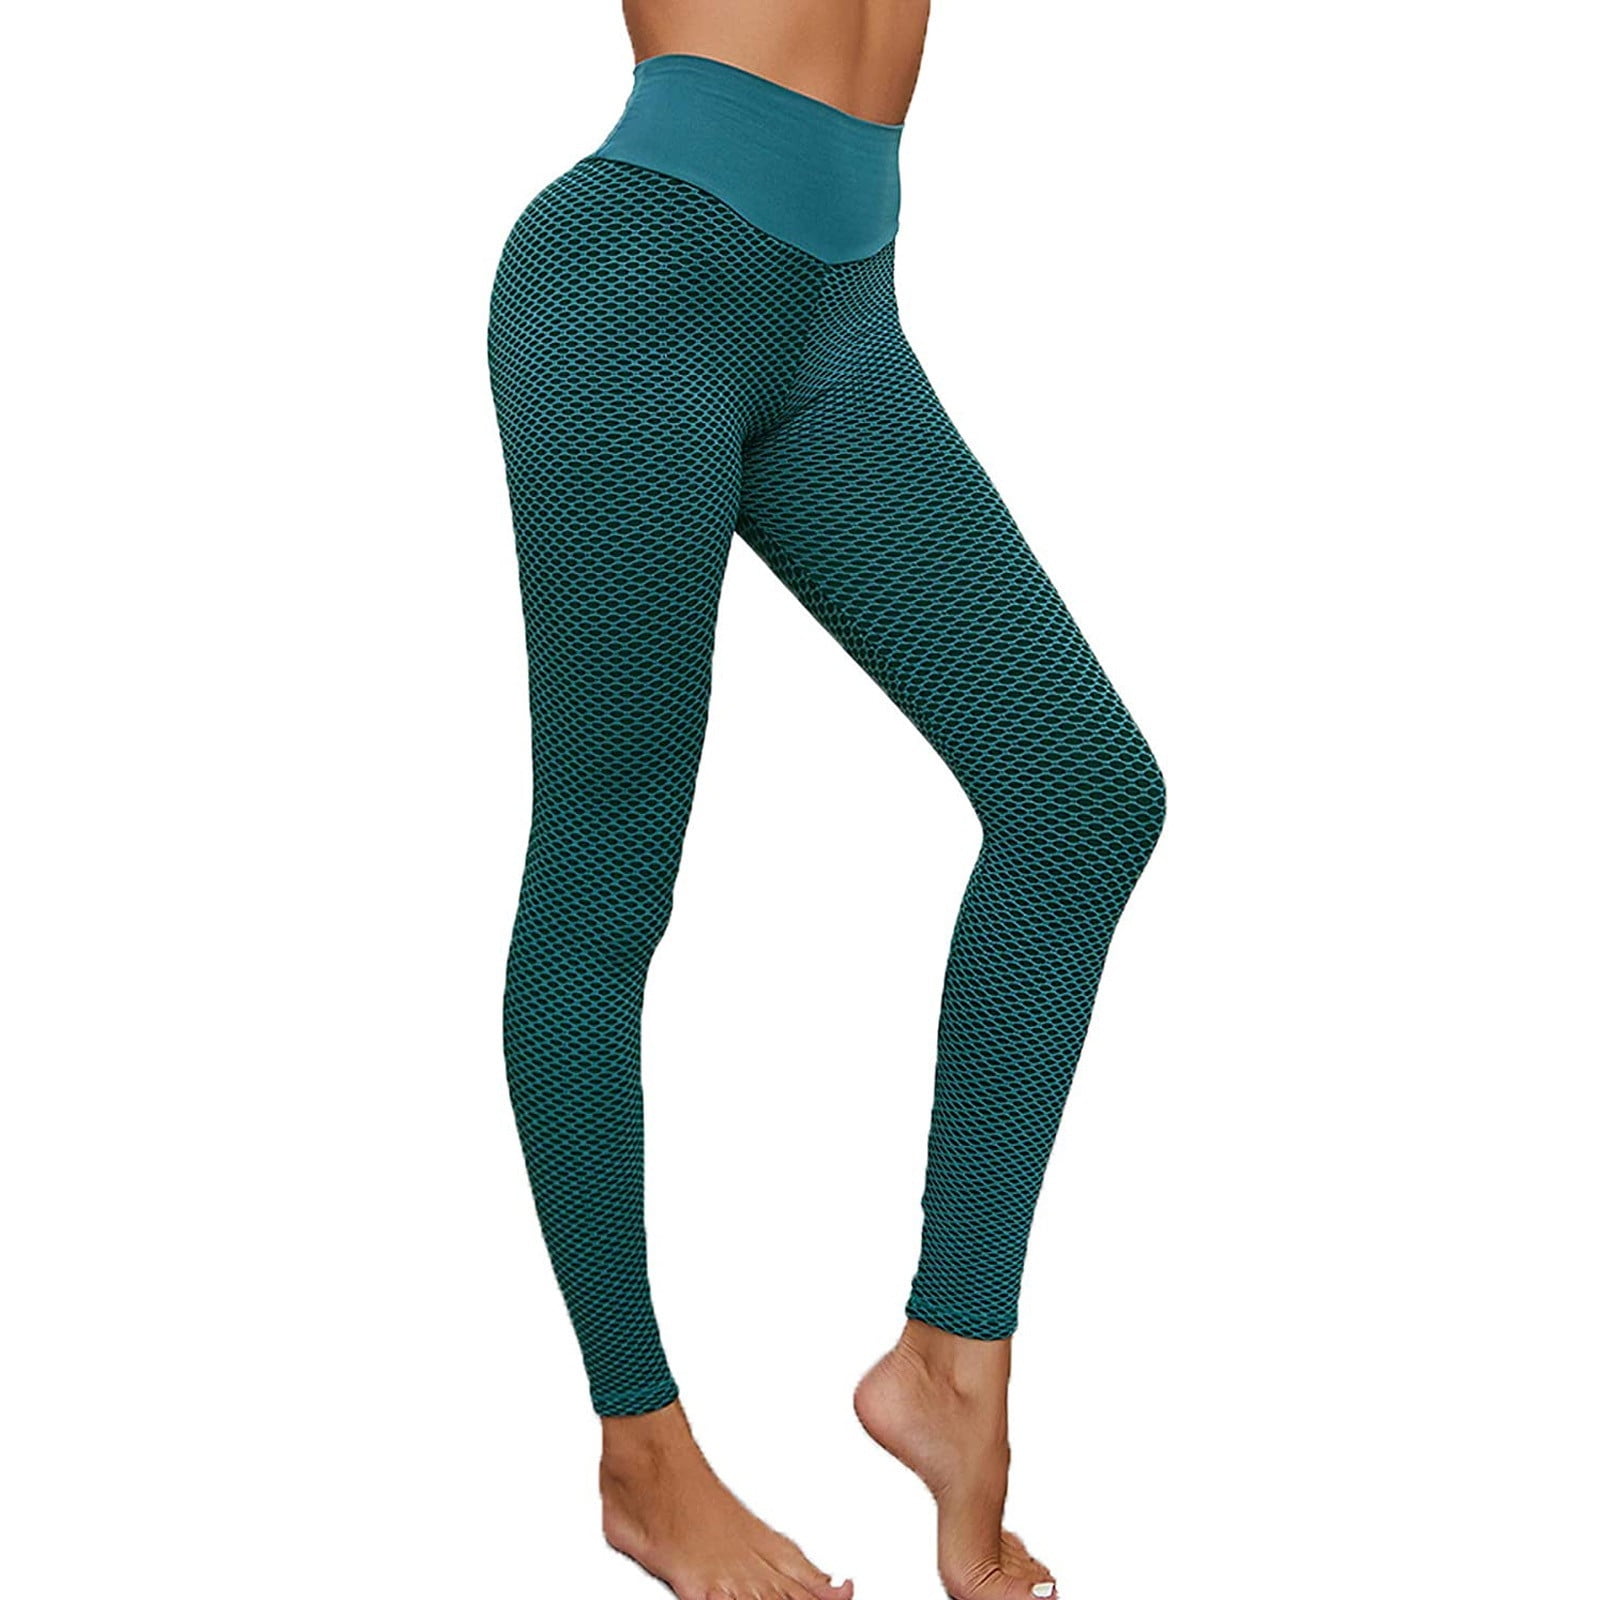 Amtdh Womens Yoga Pants for Women Sweatpants High Waist Tummy Control Workout  Pants Butt Lift Tights Workout Pants Stretch Athletic Slimming Fitness  Running Yoga Leggings for Women Green M 